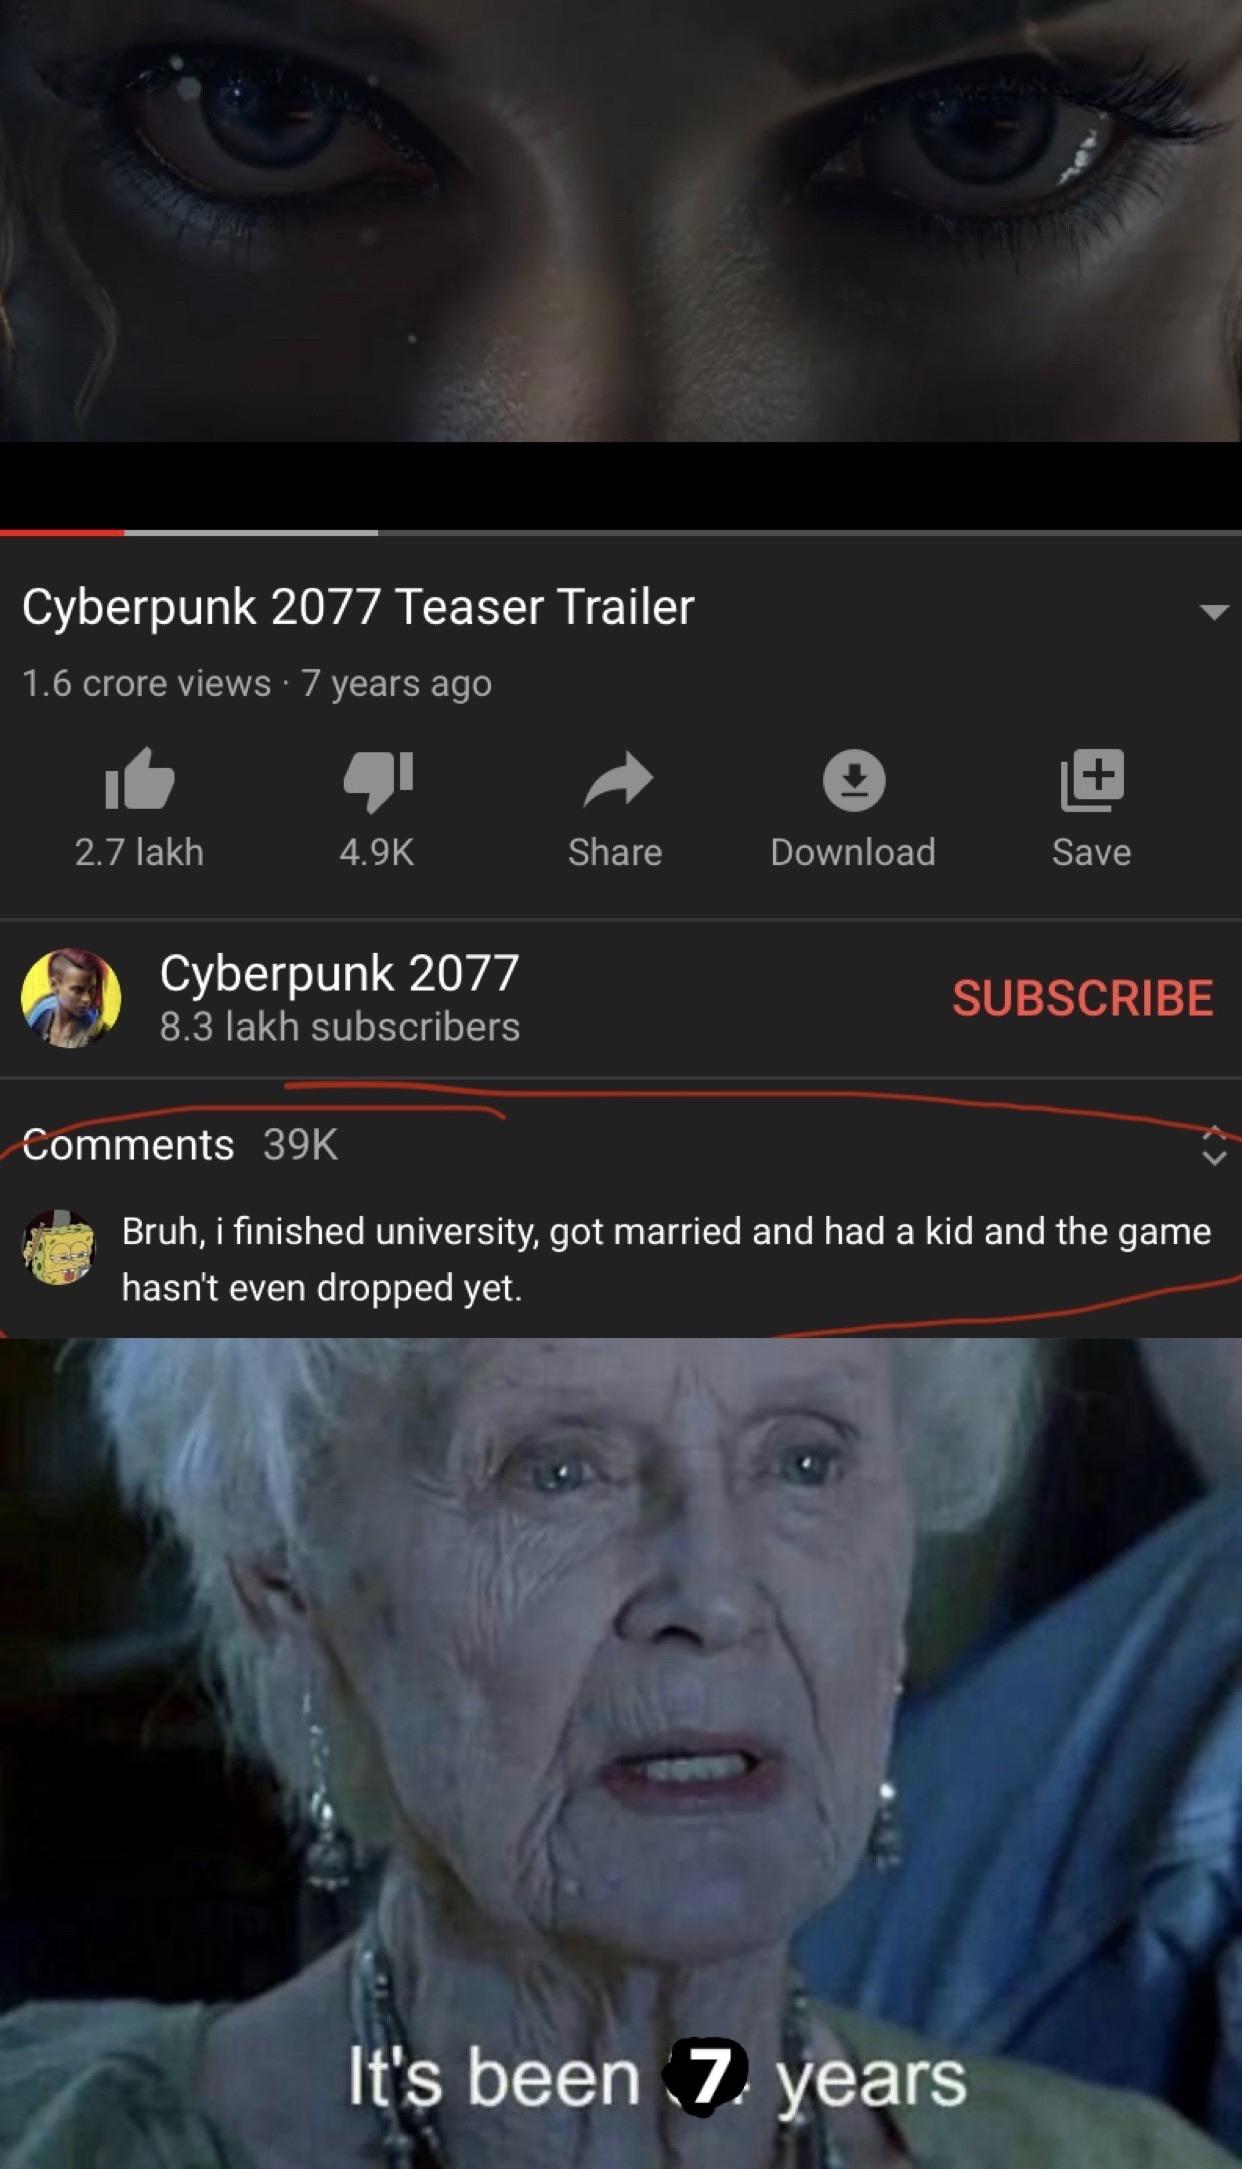 Dank, Star Citizen, Yandere Simulator, Heat, Blade, Bannerlord Dank Memes Dank, Star Citizen, Yandere Simulator, Heat, Blade, Bannerlord text: Cyberpunk 2077 Teaser Trailer 1.6 crore views • 7 years ago 2.7 lakh 4.9K Share Download Save SUBSCRIBE Cyberpunk 2077 8.3 lakh subscribers Comments 39K Bruh, i finished university, got married and had a kid and the game hasn't even dropped yet. been 7) years 